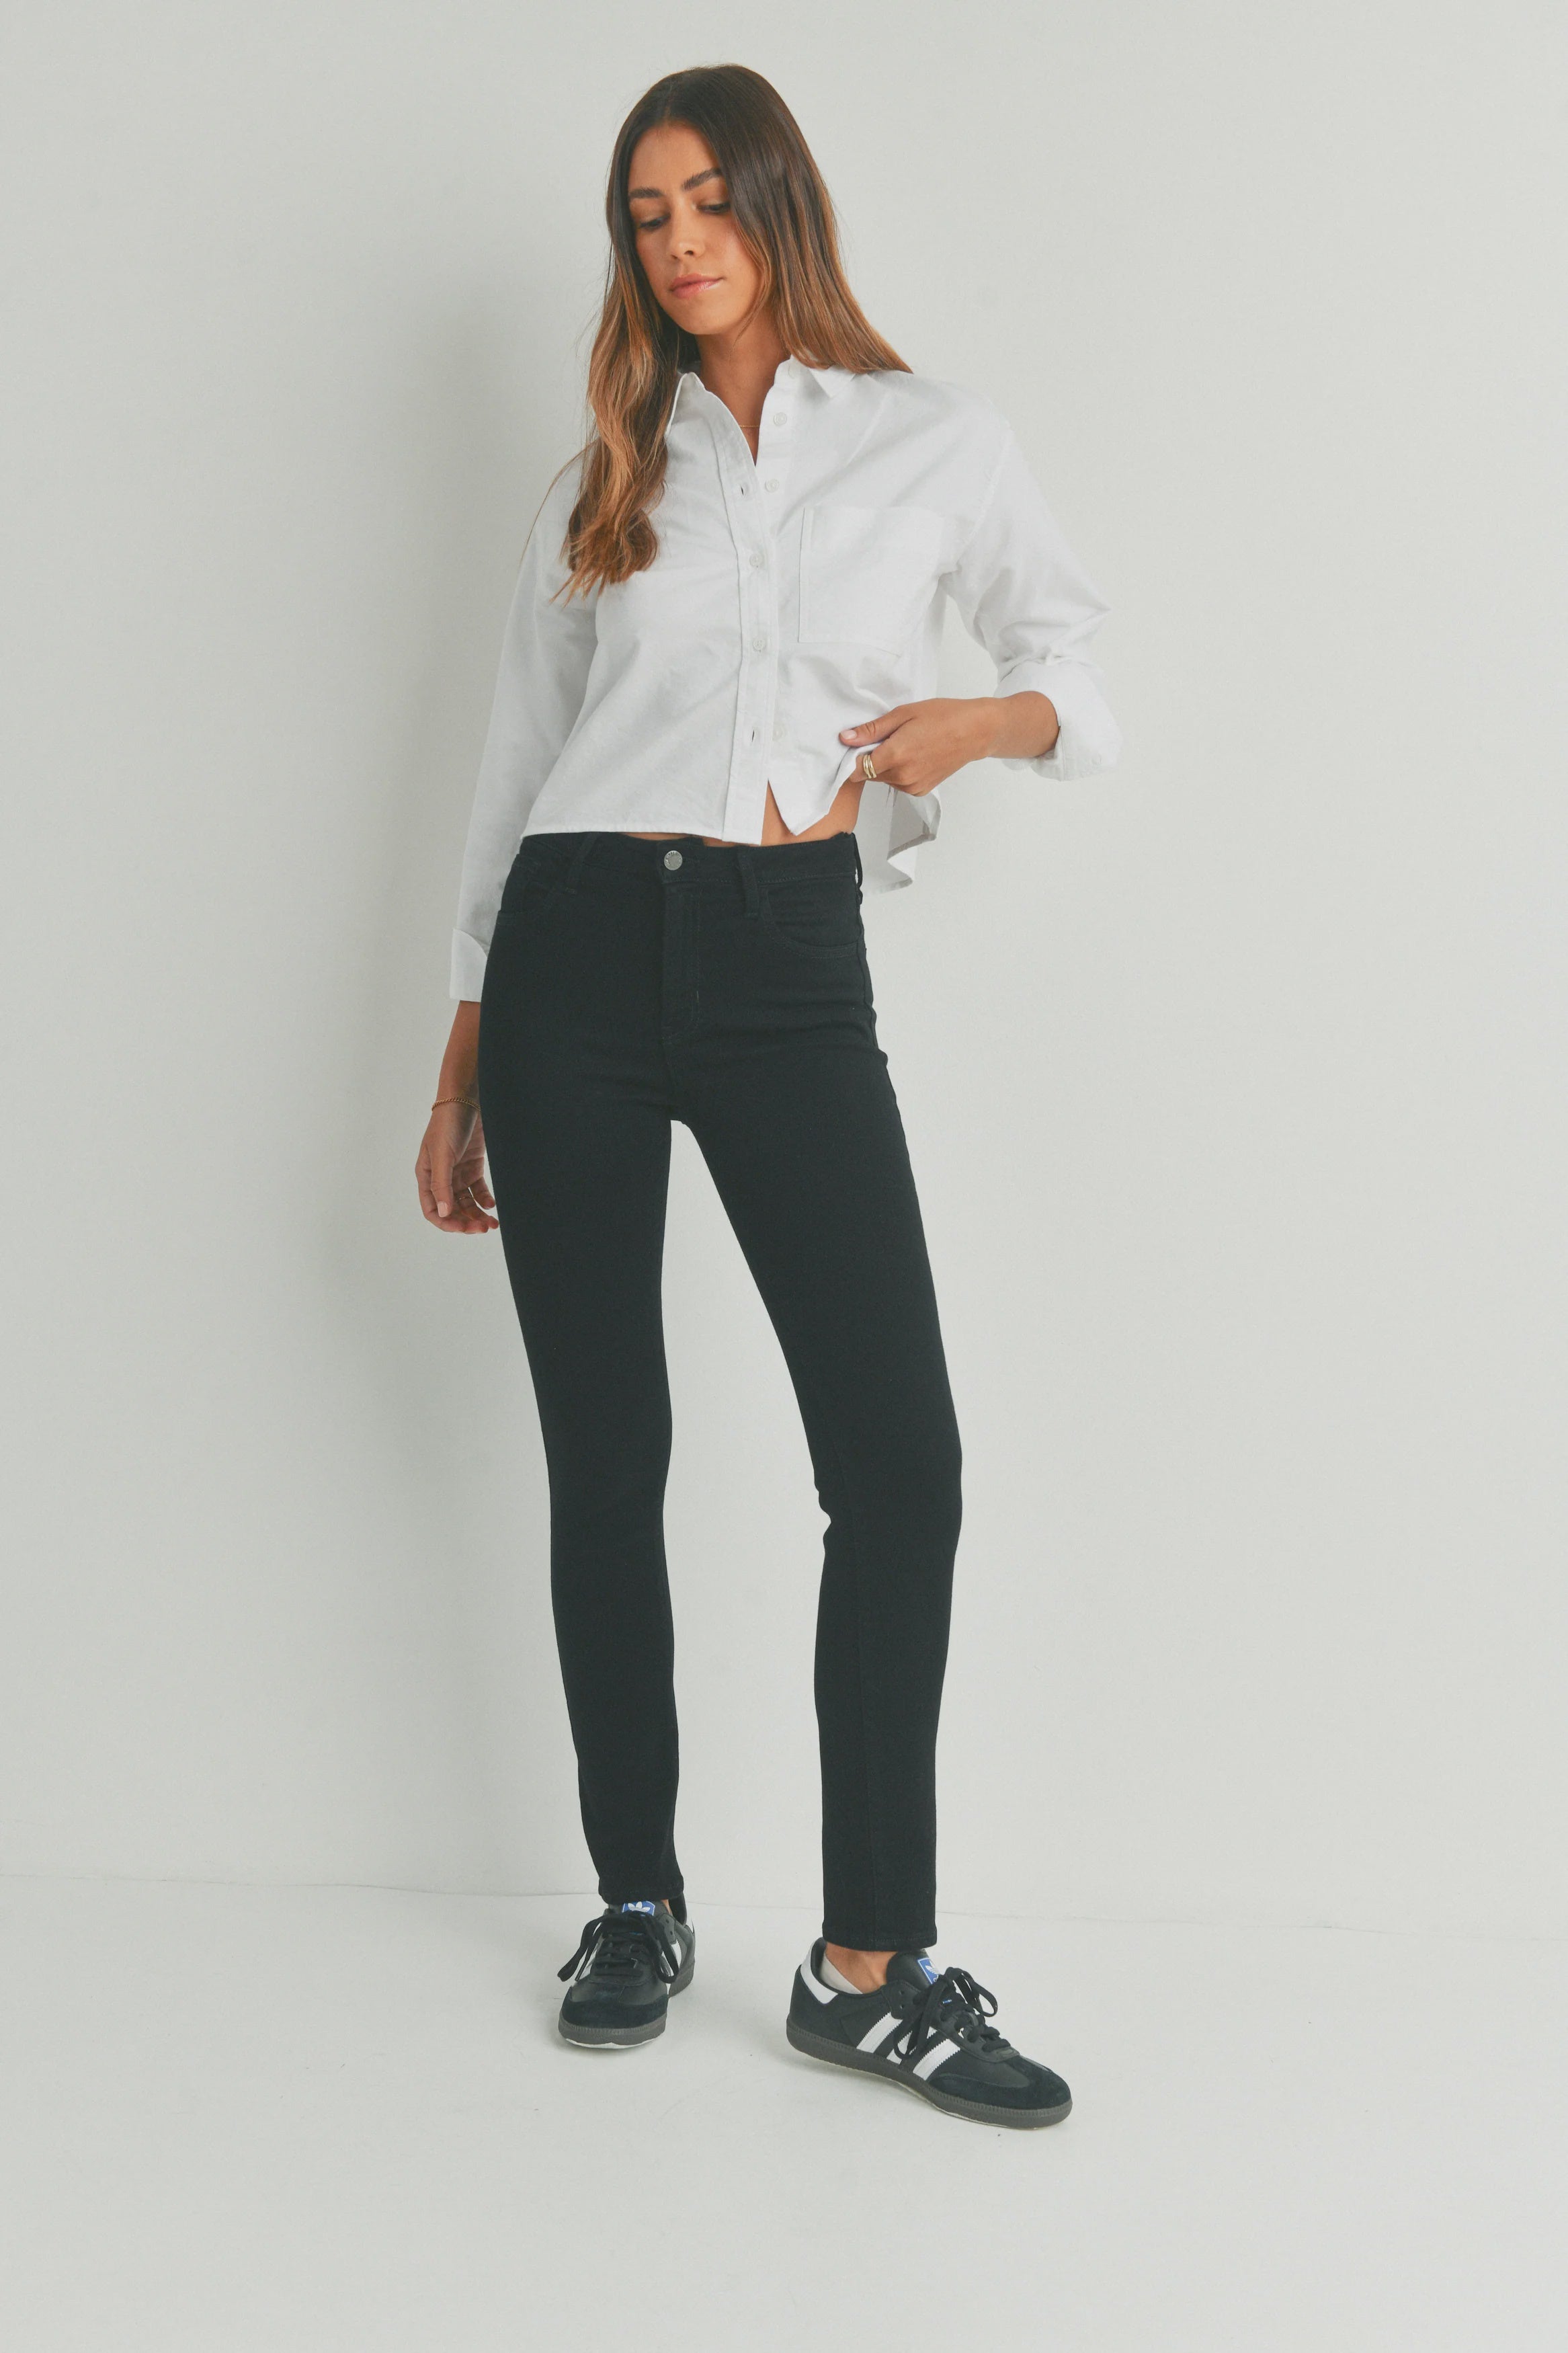 The Kyleigh Slim Straight Jeans by Just Black Denim